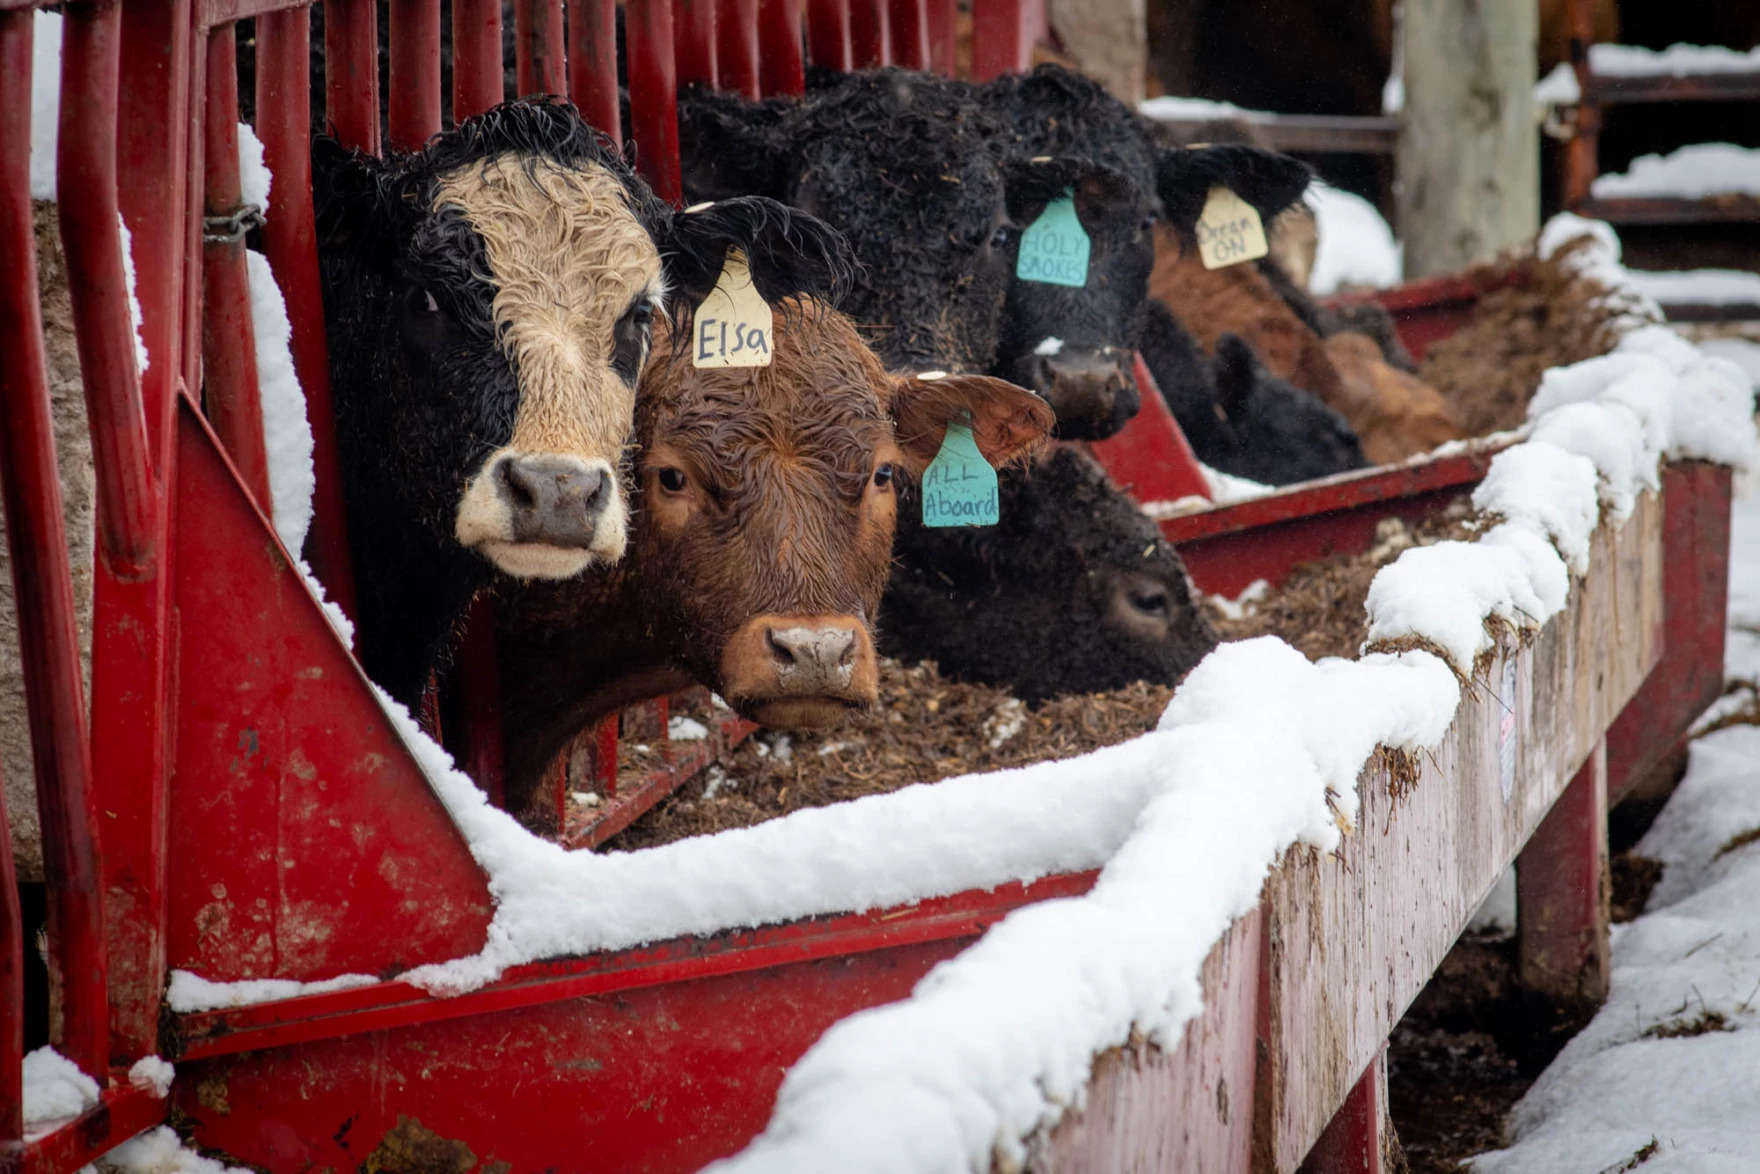 A row of farm cows with their head inbetween fences eat from a trough